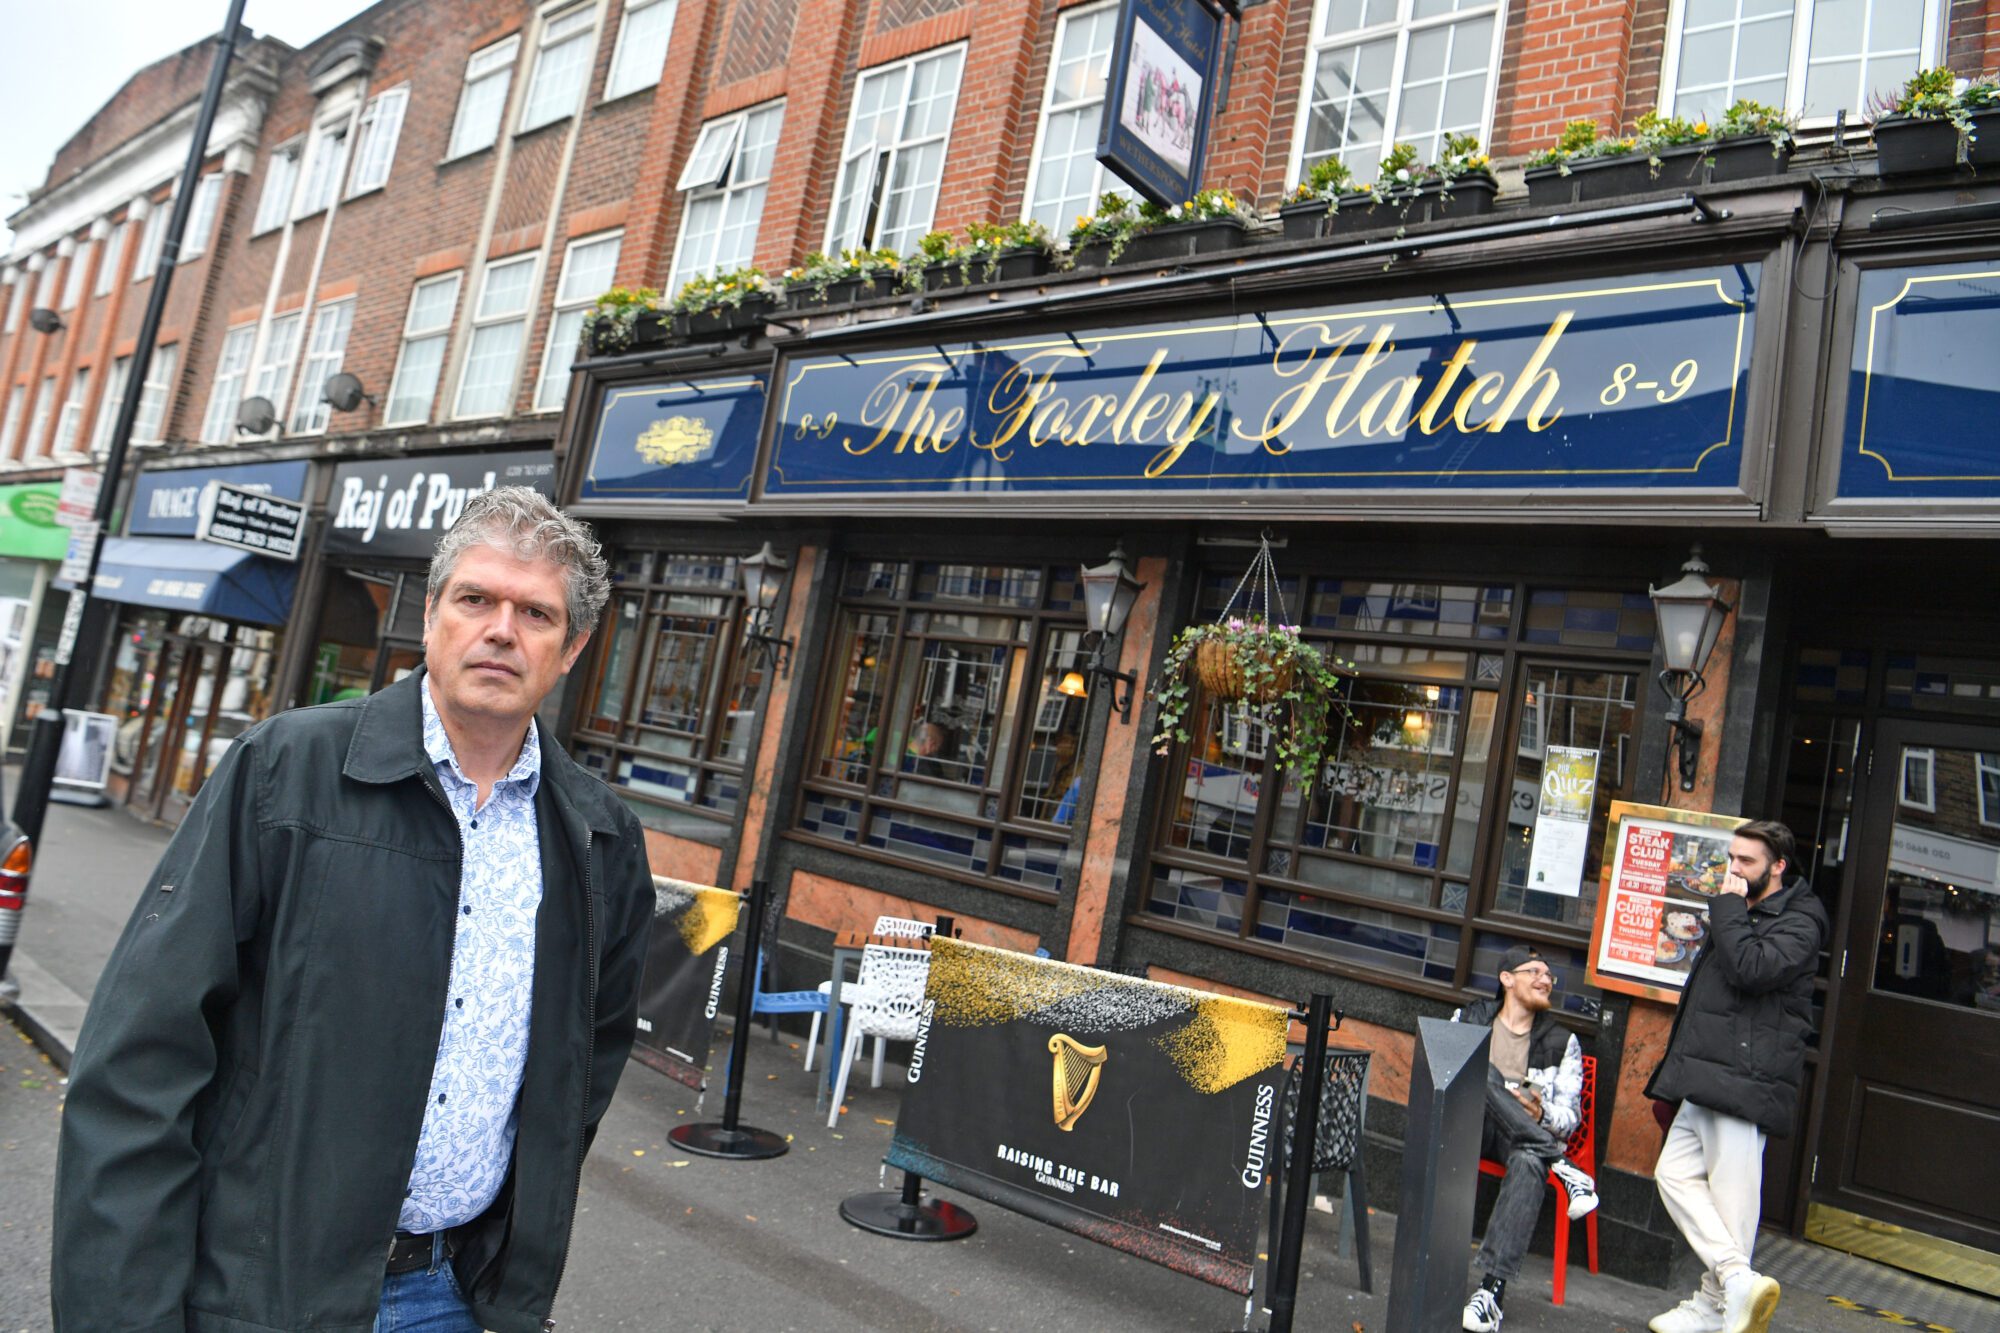 Hundreds sign petition to save Croydon Wetherspoons – South London News